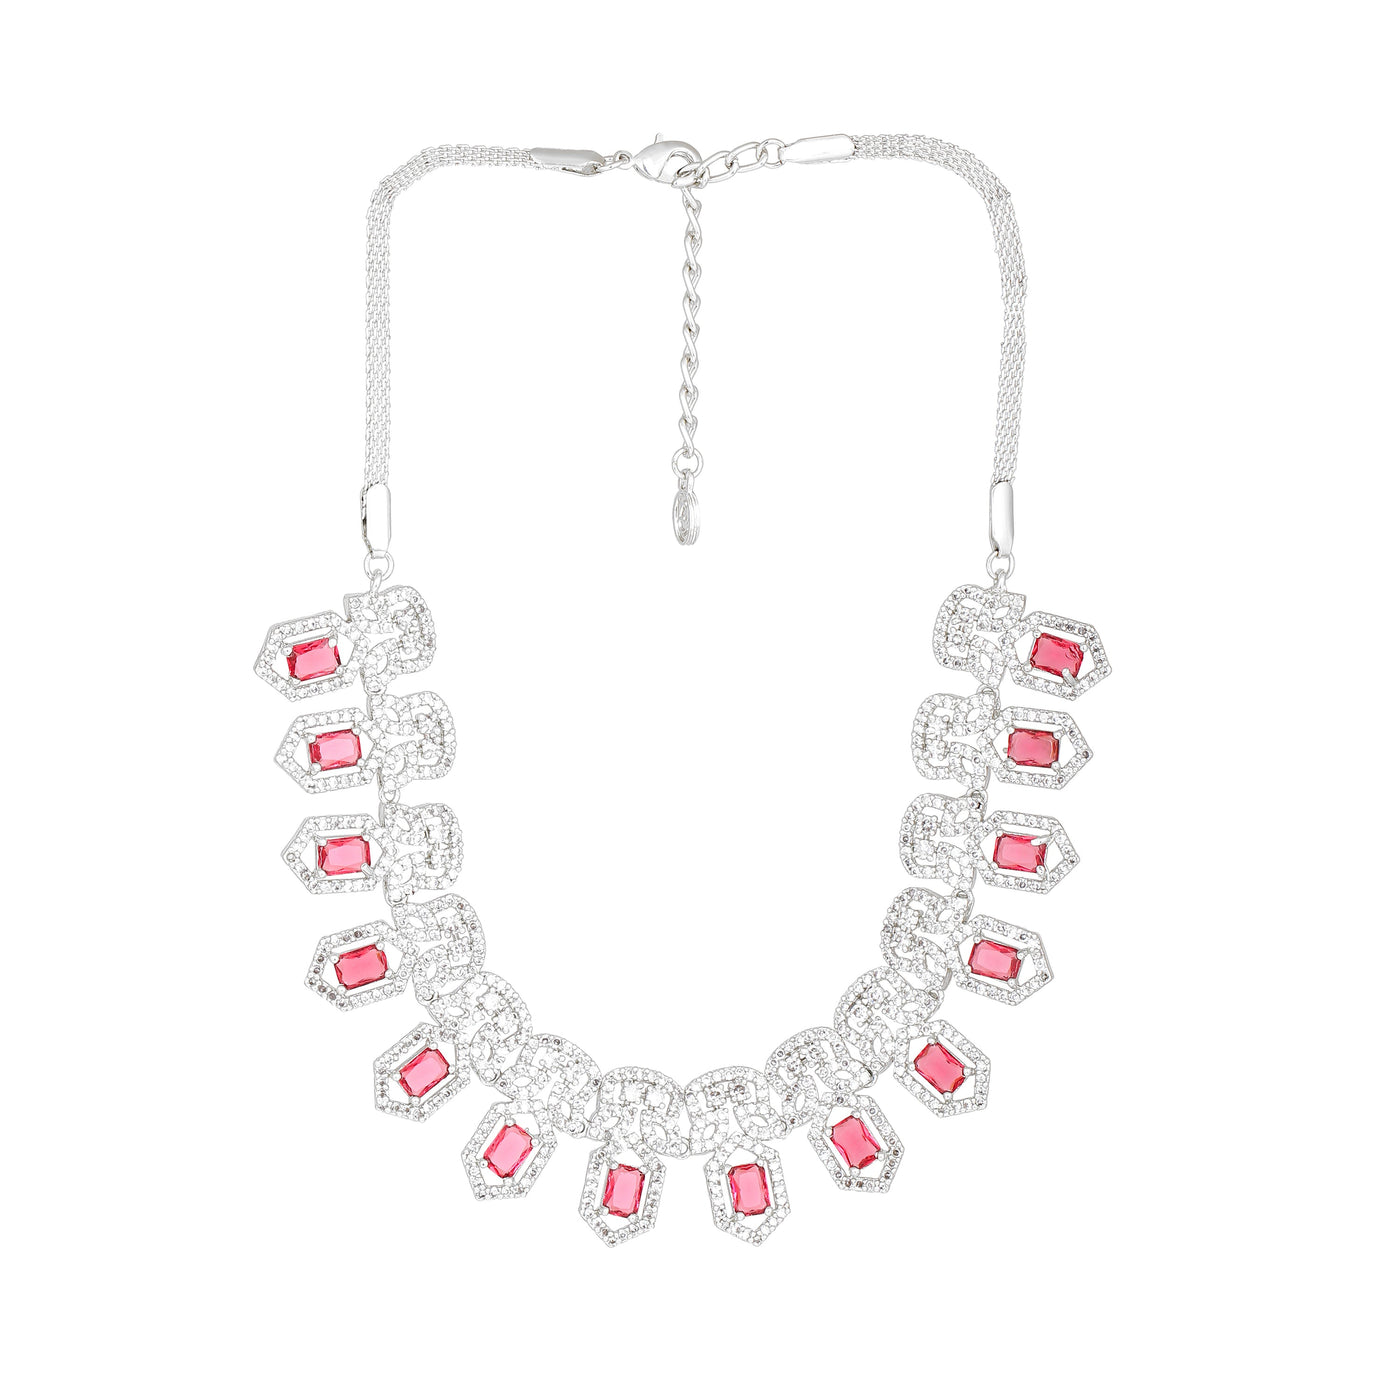 Estele Rhodium Plated CZ Sparkling Necklace Set with Tourmaline Pink Crystals for Women